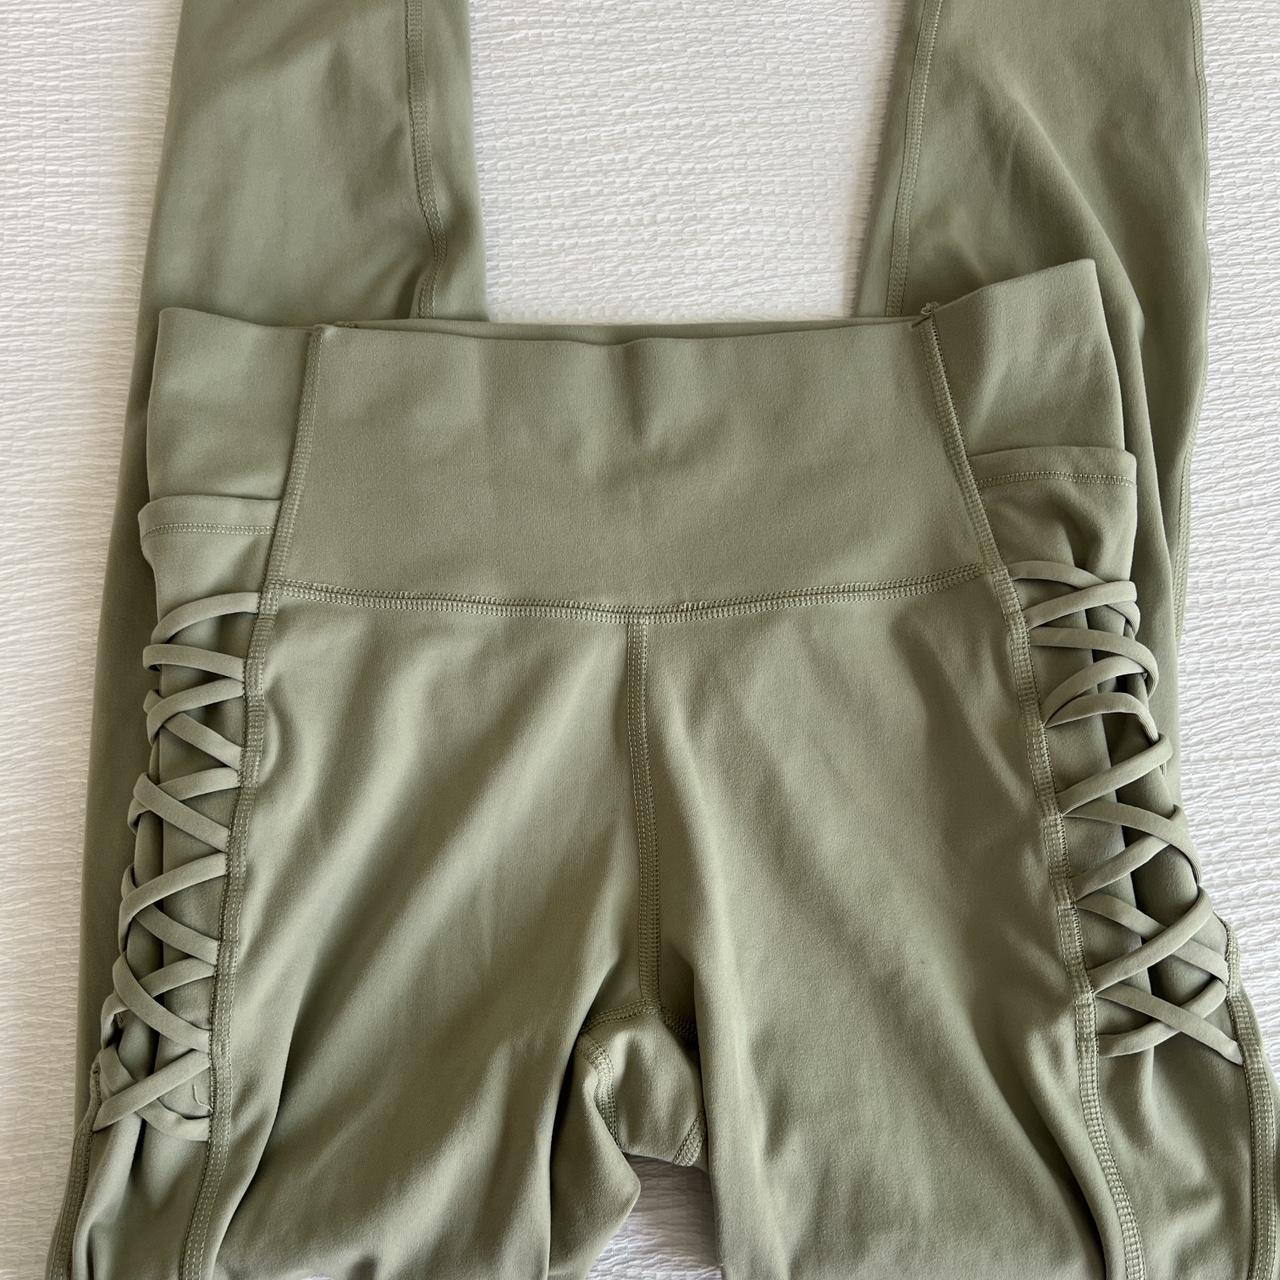 small green all in motion leggings with pockets - Depop